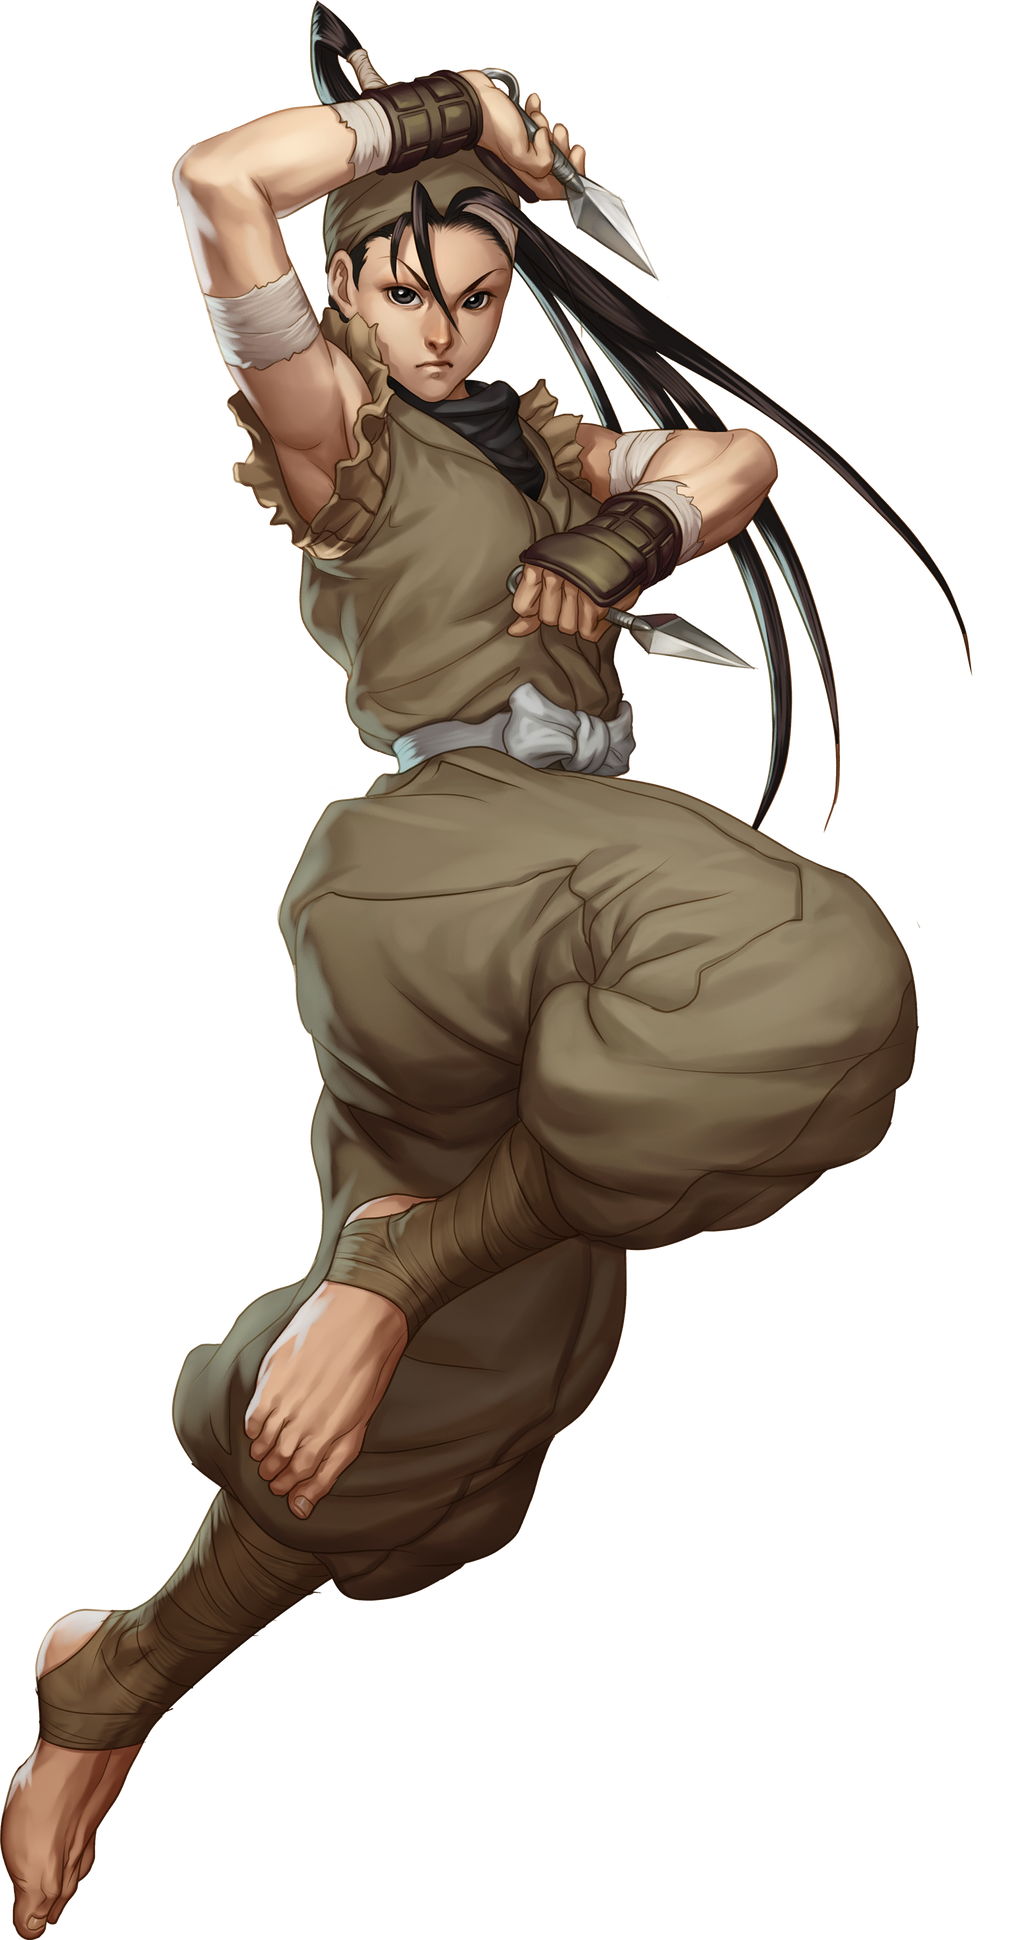 Category:Deceased Characters, Street Fighter Wiki